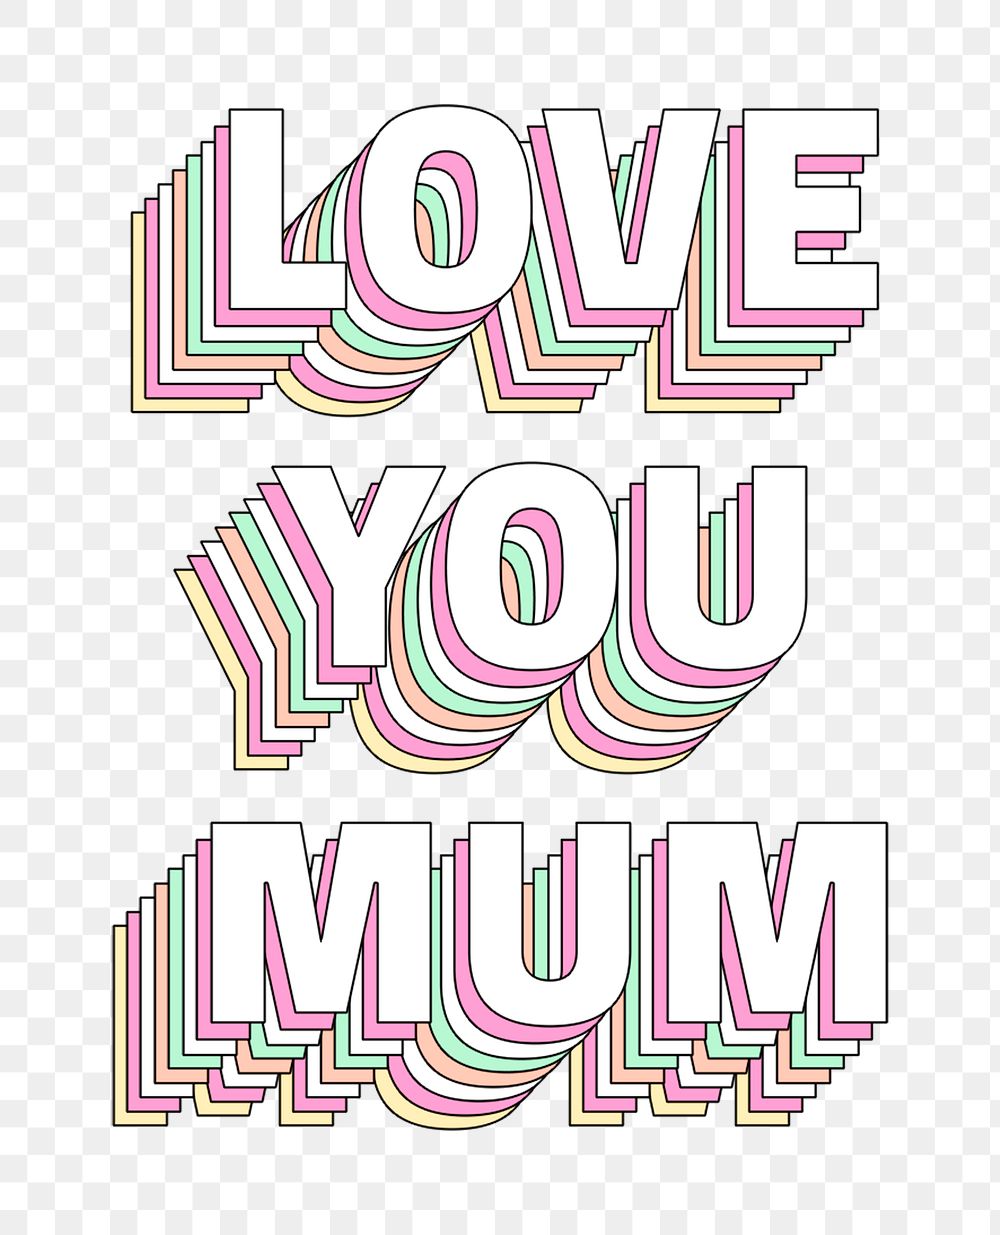 Png Love you mum layered text typography retro word